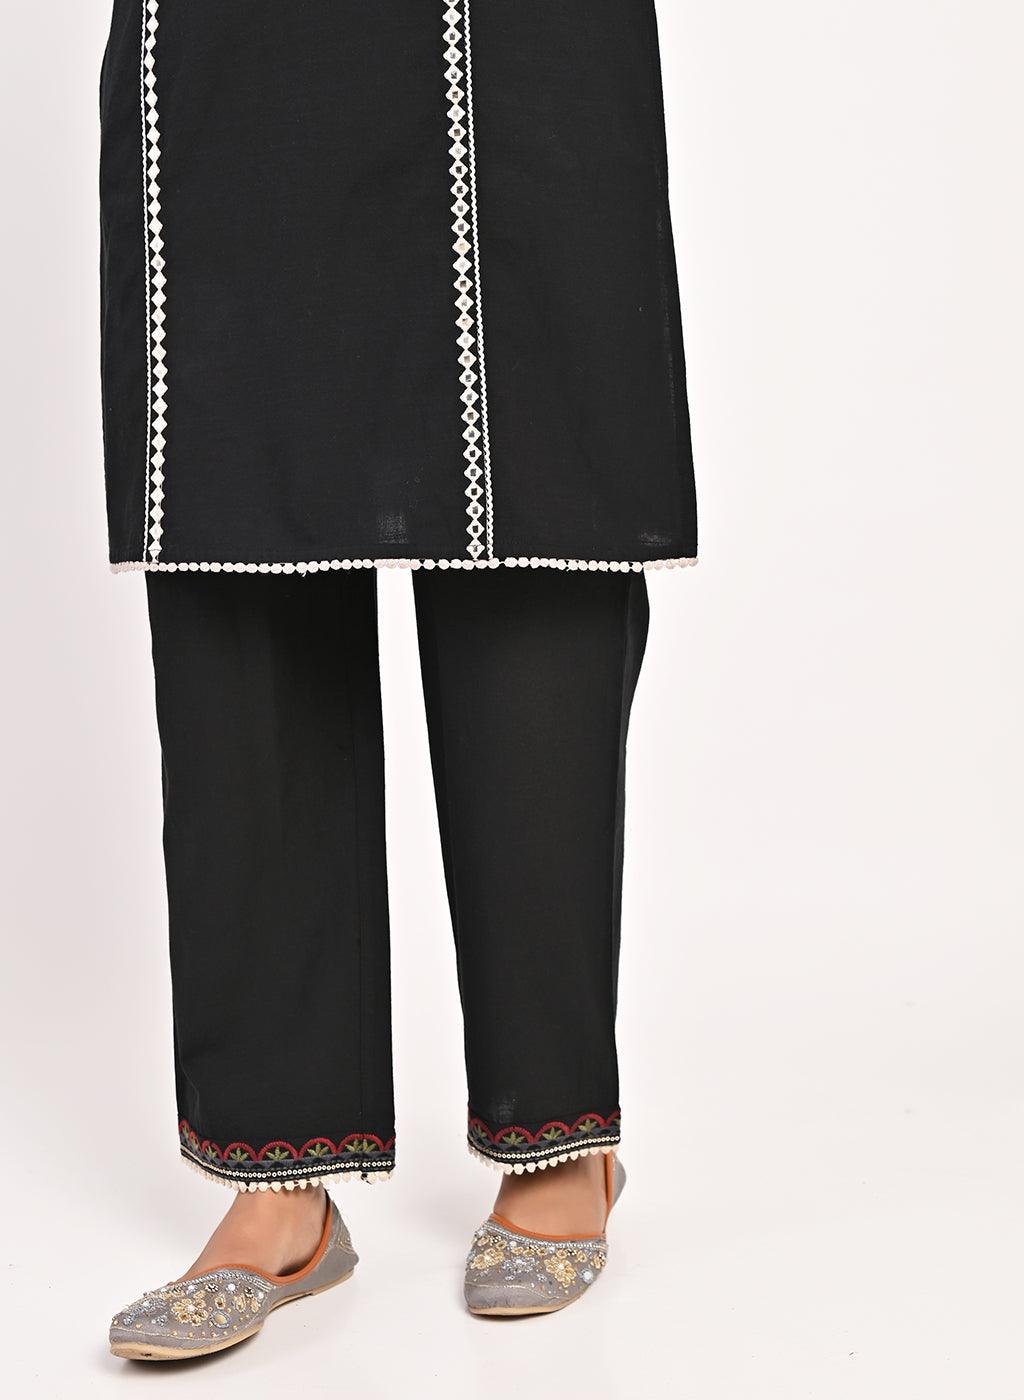 Black Schiffili Embroidered Cotton Co-ord Set with 3/4th Sleeves - Lakshita